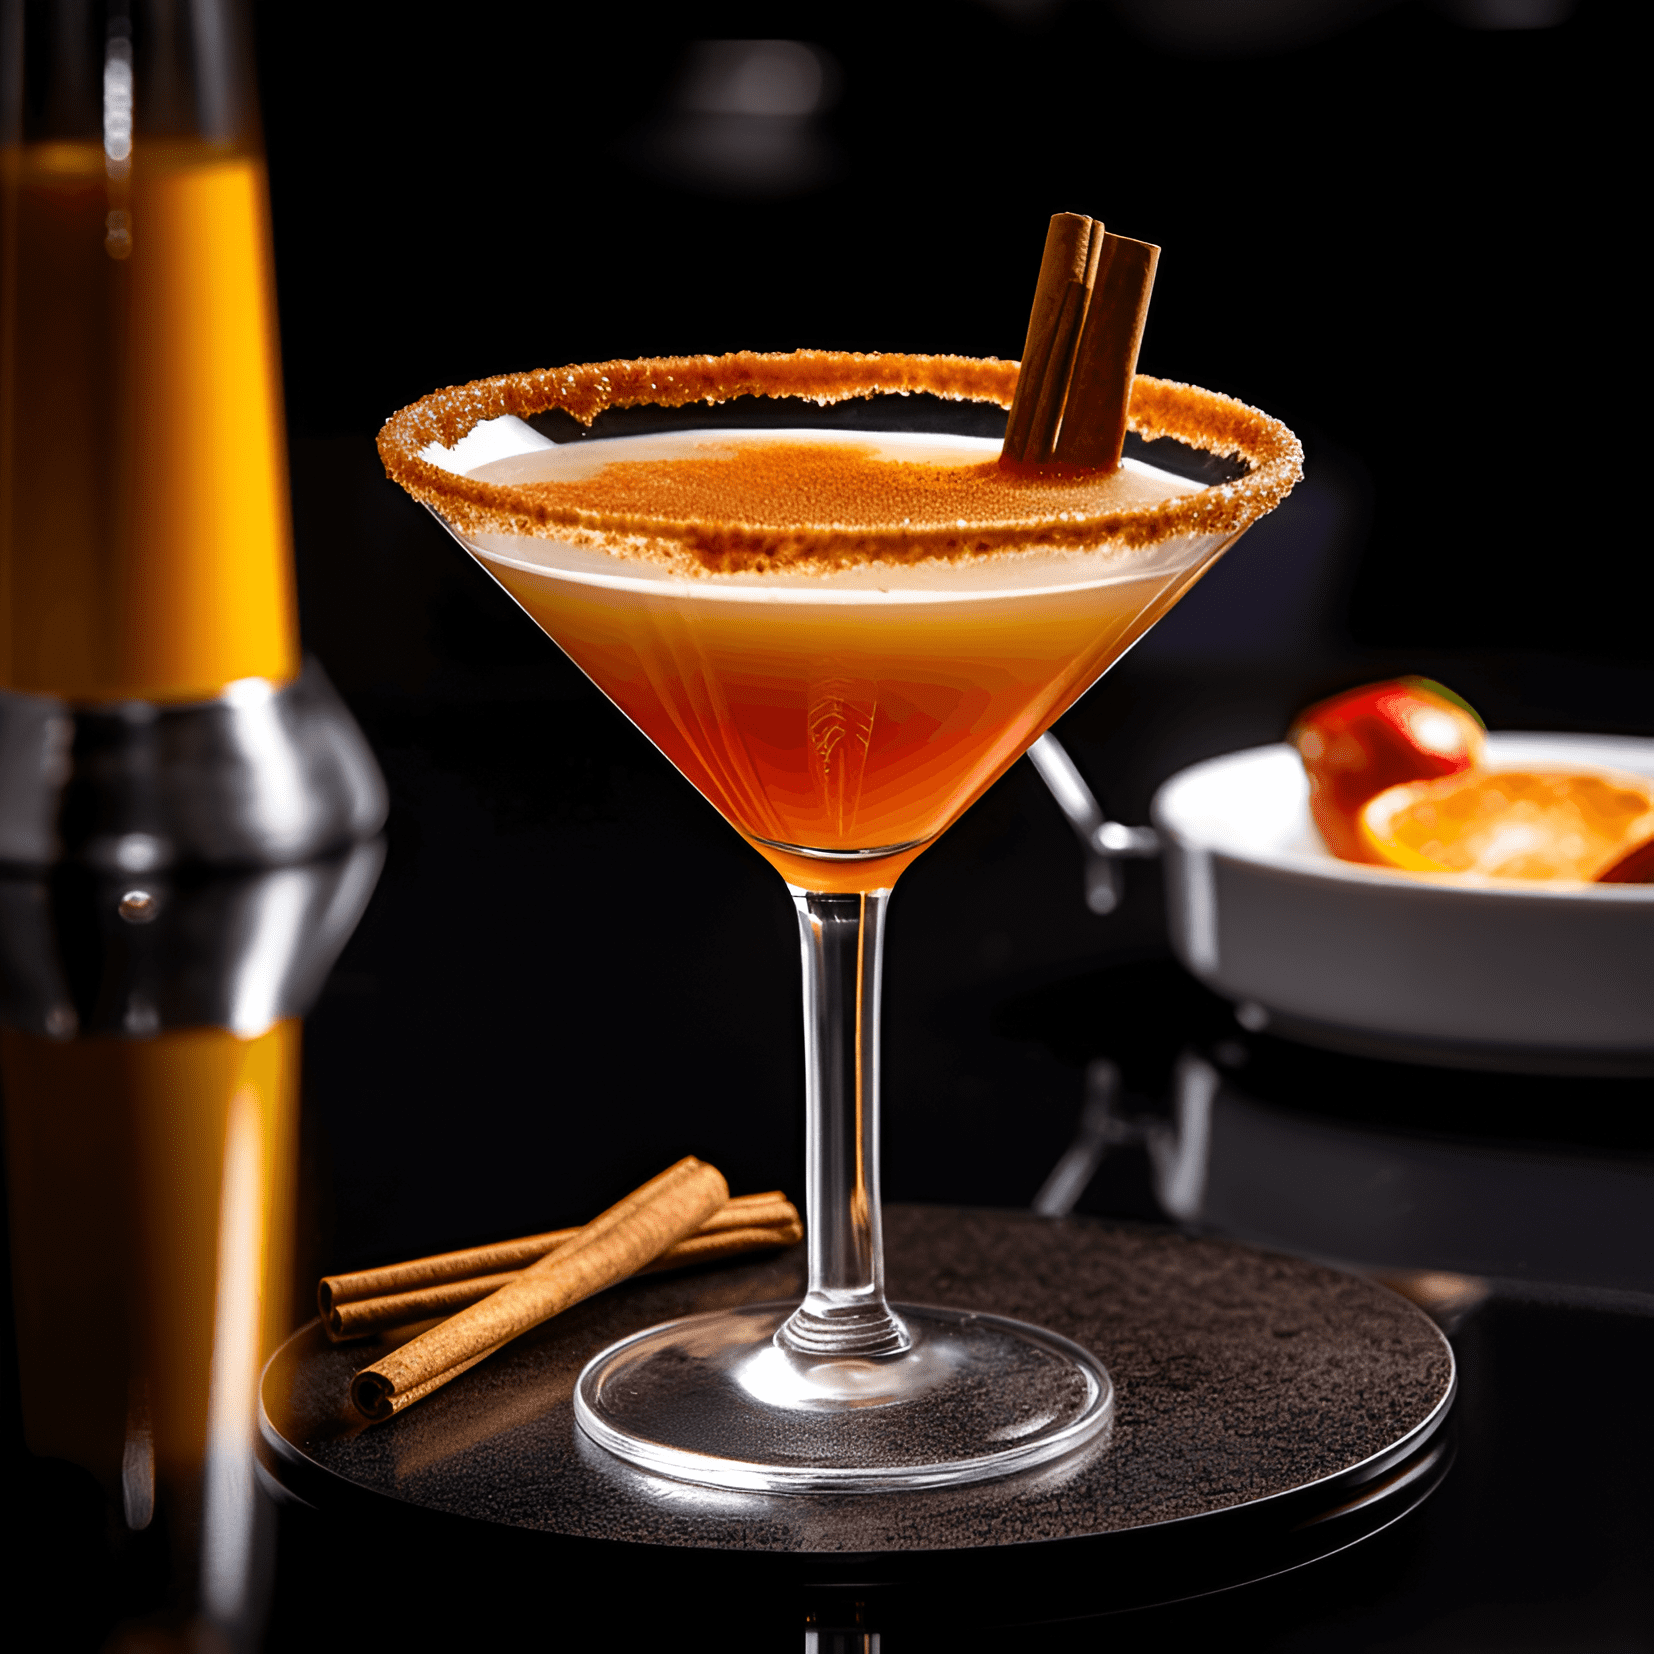 Cable Car Cocktail Recipe - The Cable Car cocktail offers a delightful balance of sweet and sour flavors, with a hint of spice from the cinnamon garnish. The drink is smooth, refreshing, and moderately strong, making it a perfect choice for those who enjoy a well-rounded cocktail experience.